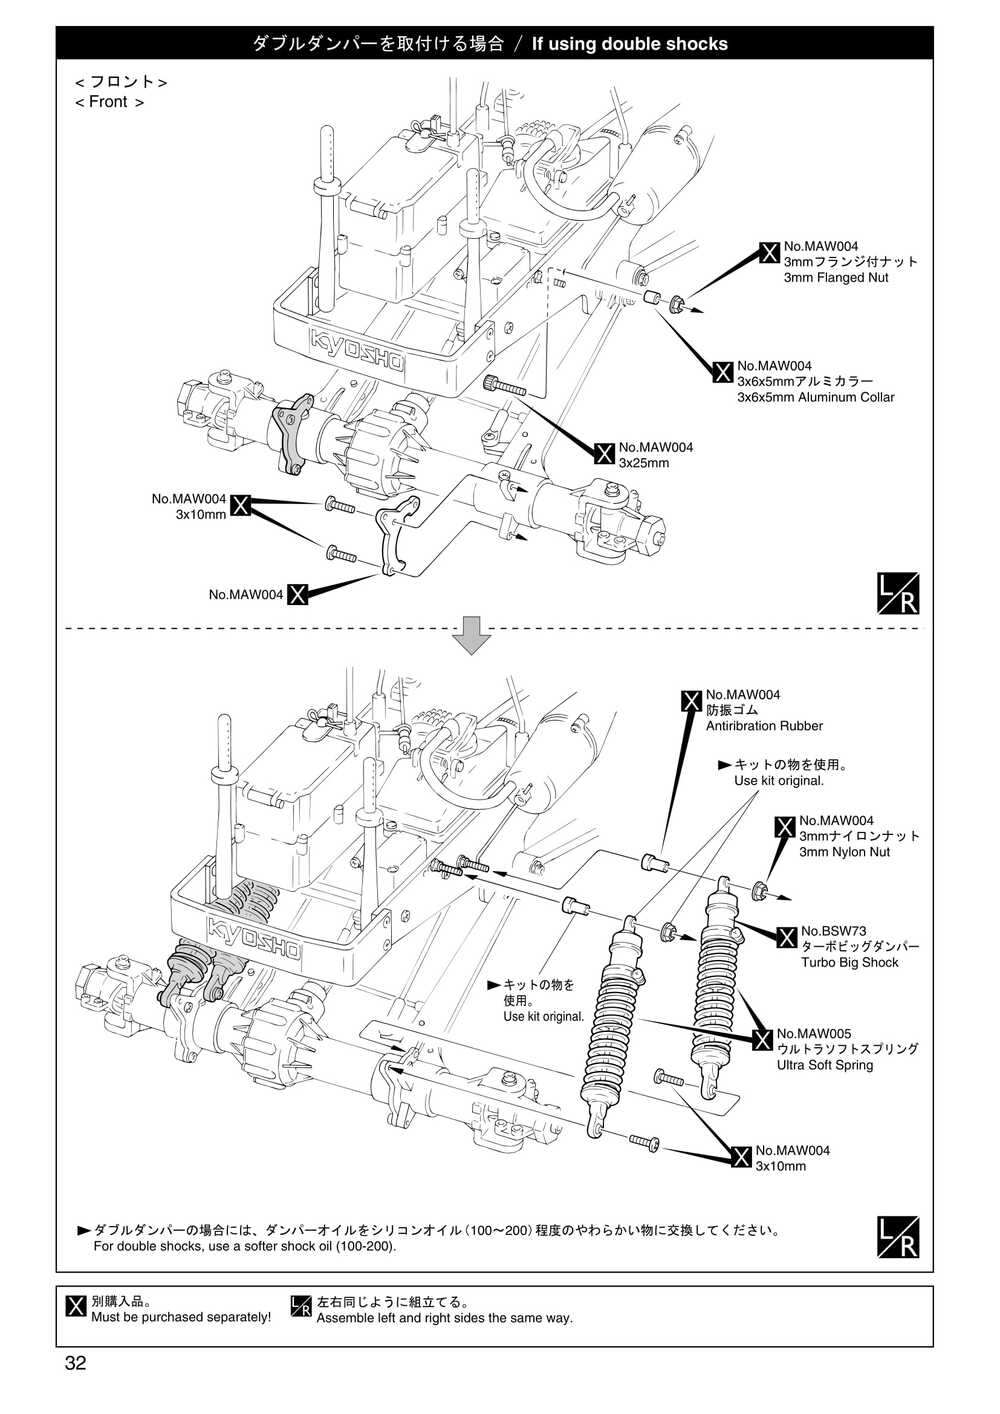 Kyosho - 31221 - Mad-Force - Manual - Page 32